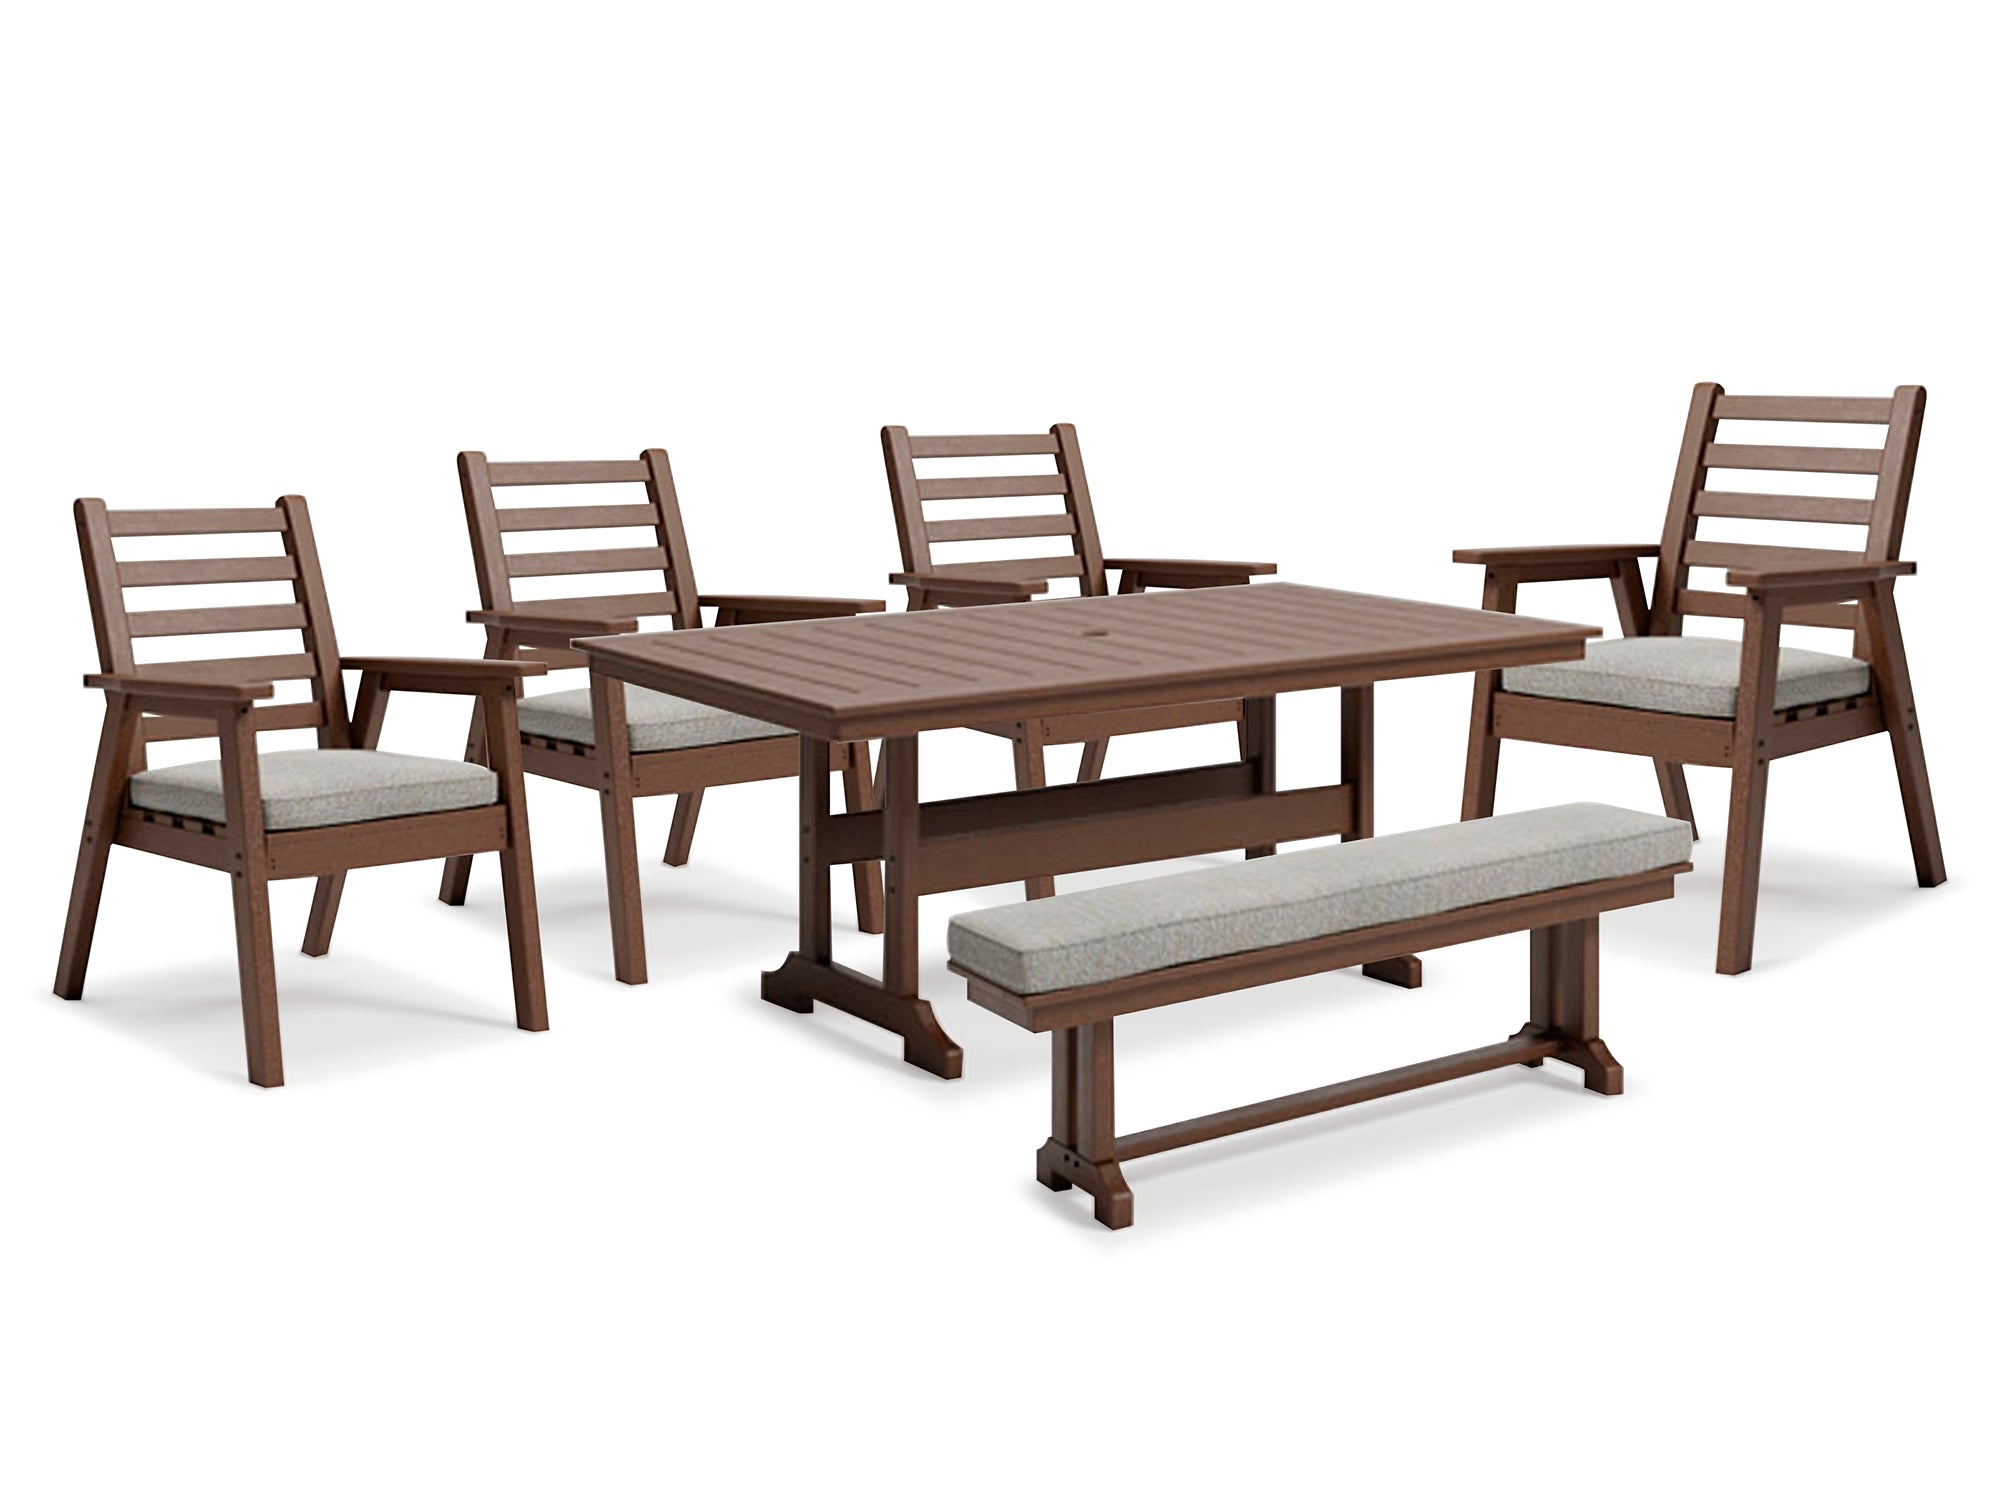 Emmeline Outdoor Dining Table and 4 Chairs and Bench